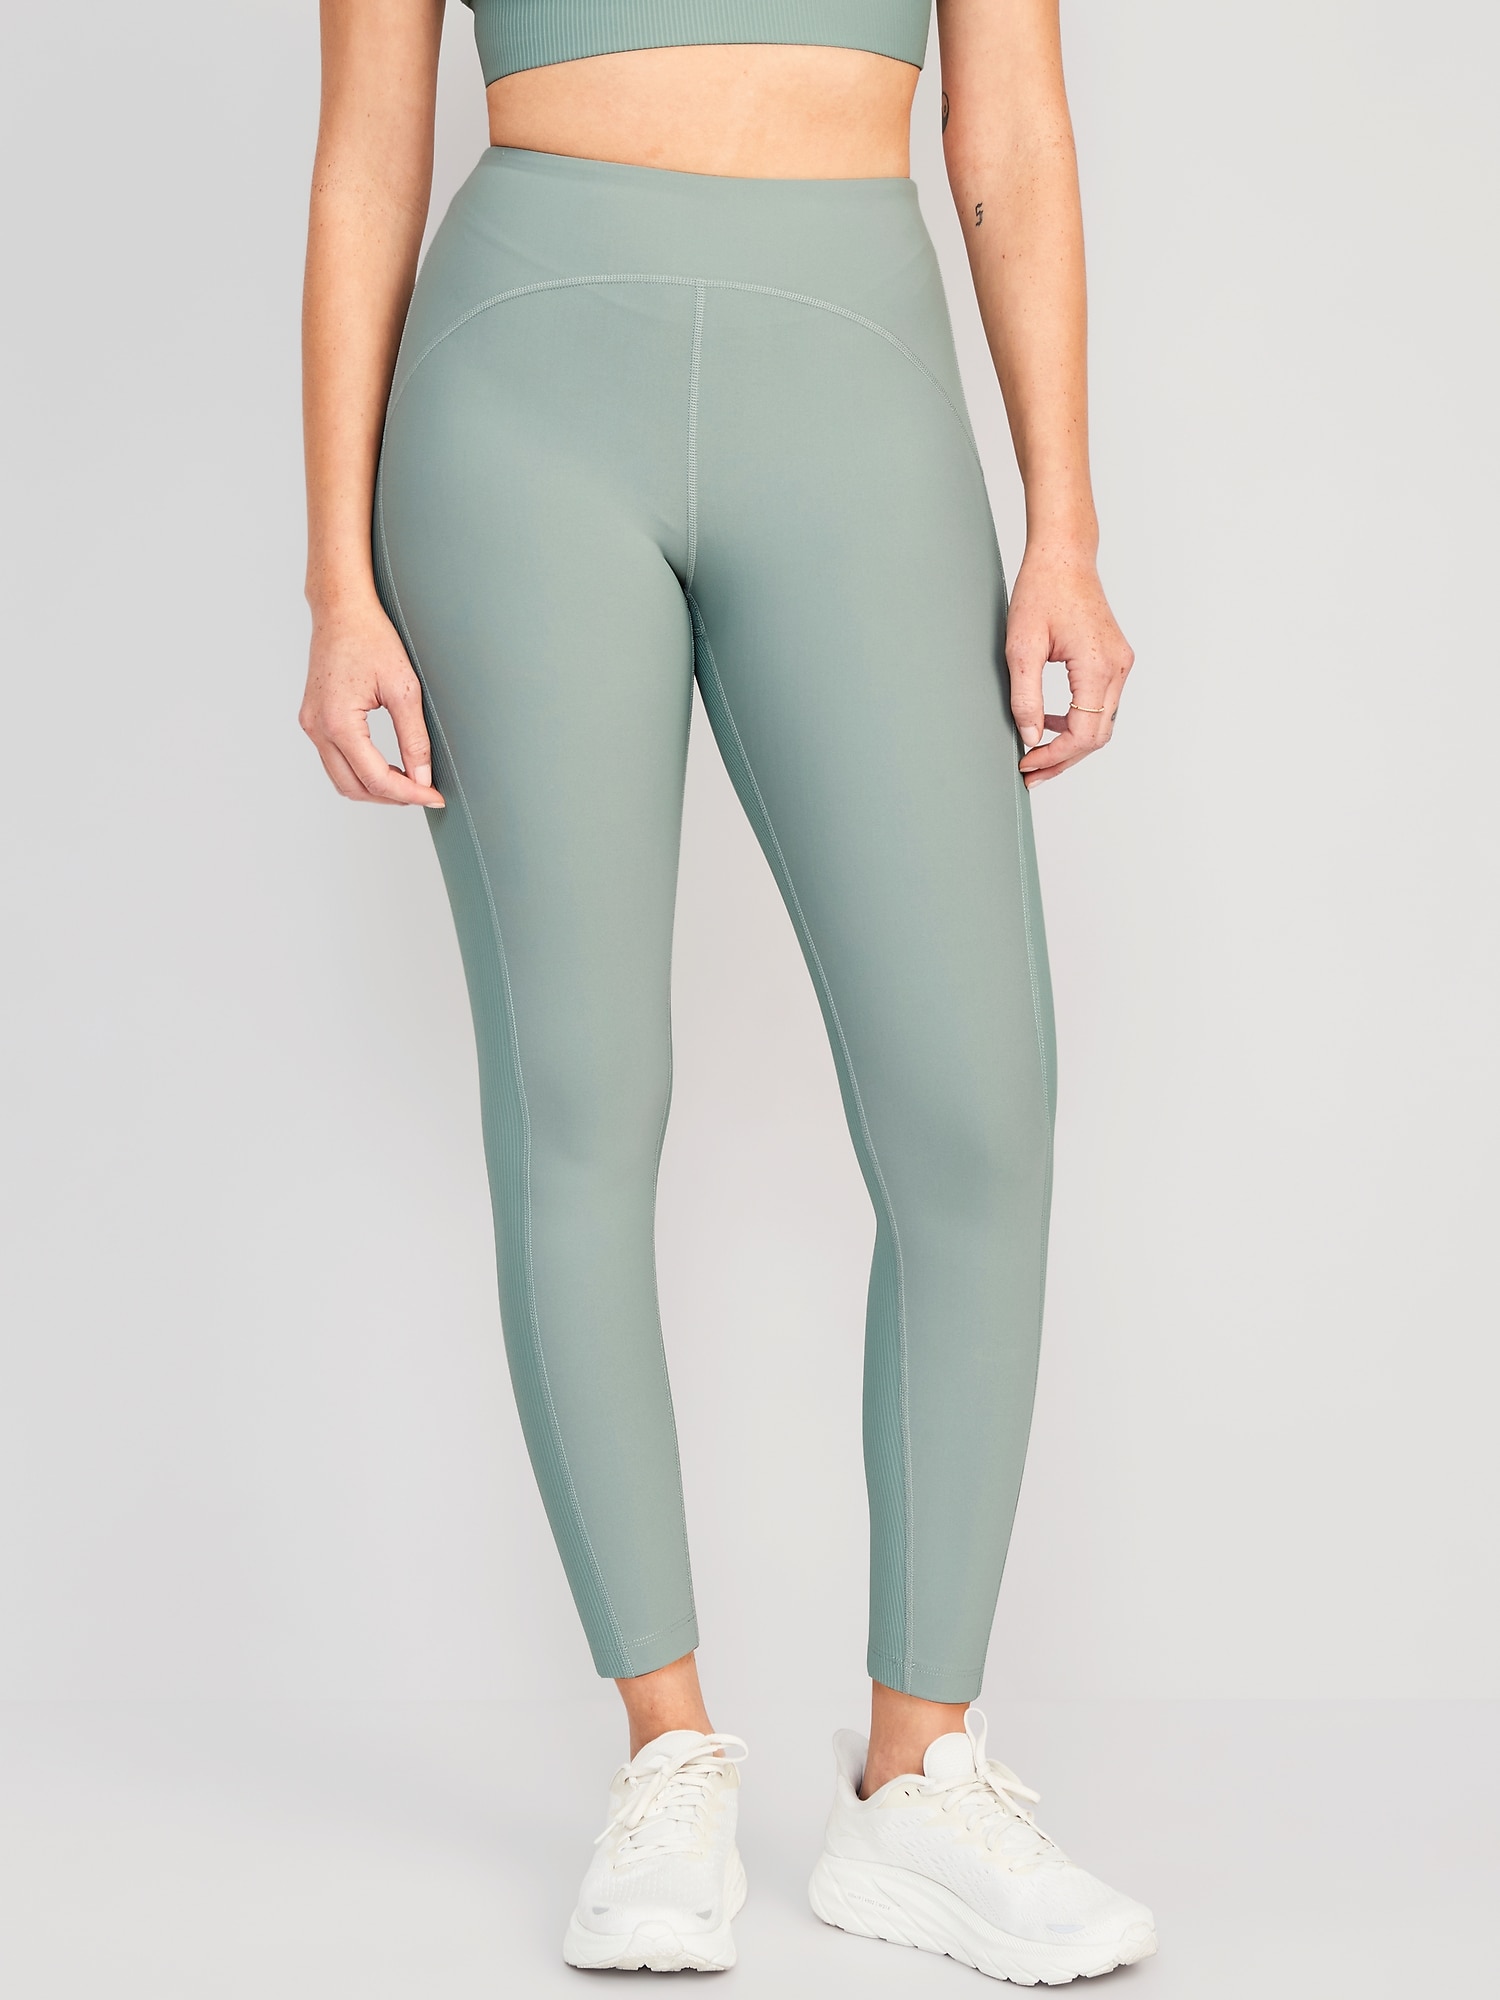 Old Navy Countries Athletic Leggings for Women